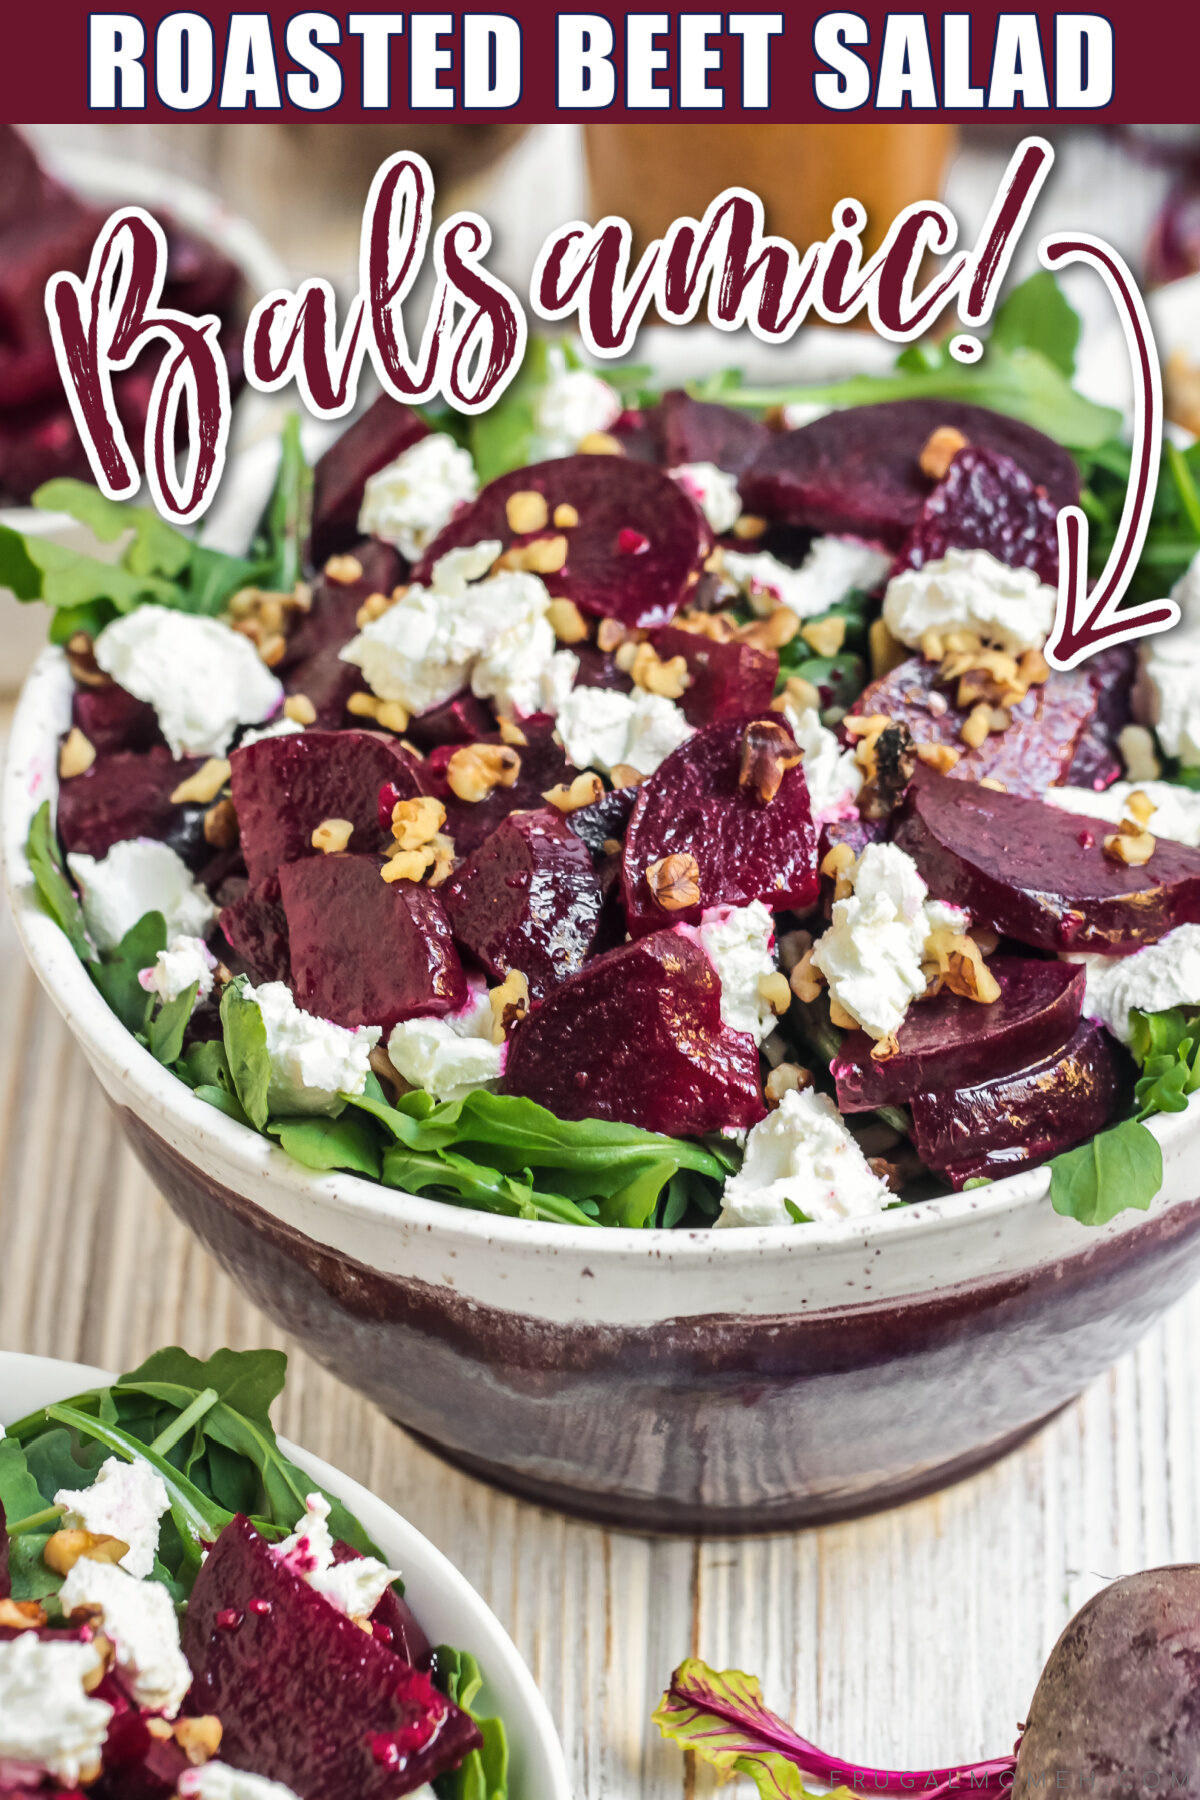 Looking for a delicious and healthy salad recipe? Check out this balsamic roasted beet salad with goat cheese and walnuts!